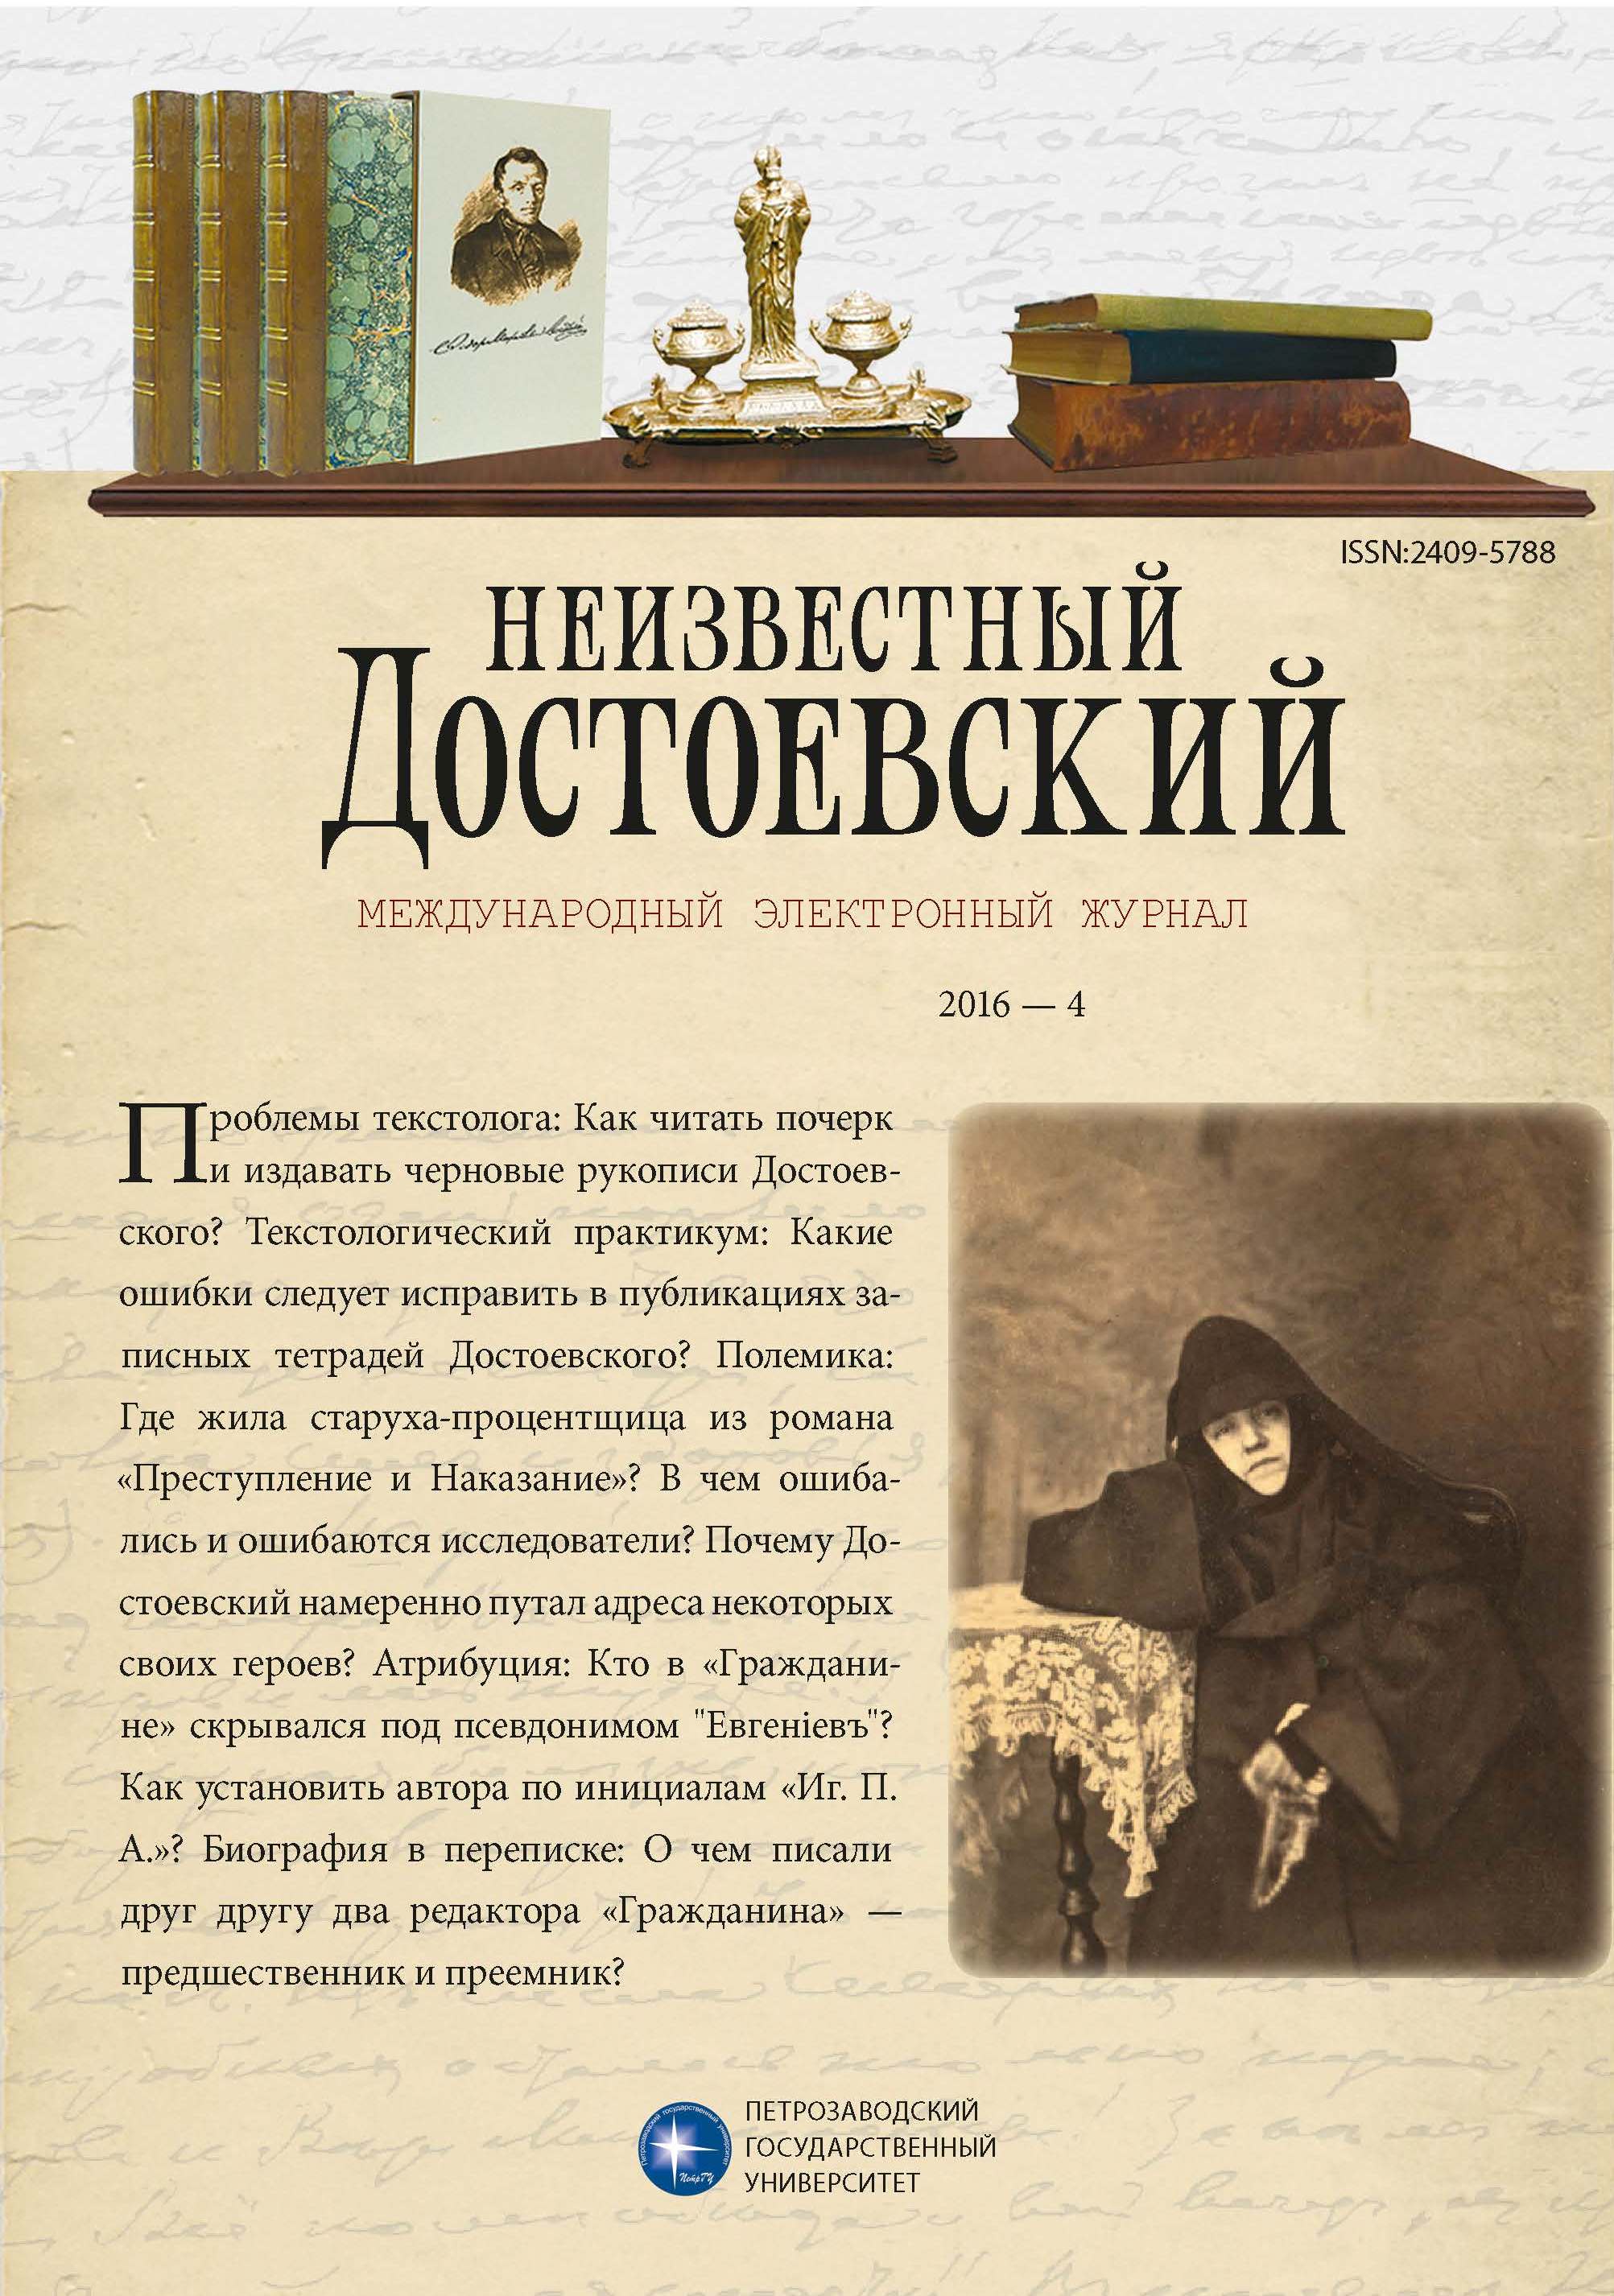 A Spiritual Poetess "Ig. P. A.": Attribution of the Letter of One Unknown Correspondent Of Dostoevsky Cover Image